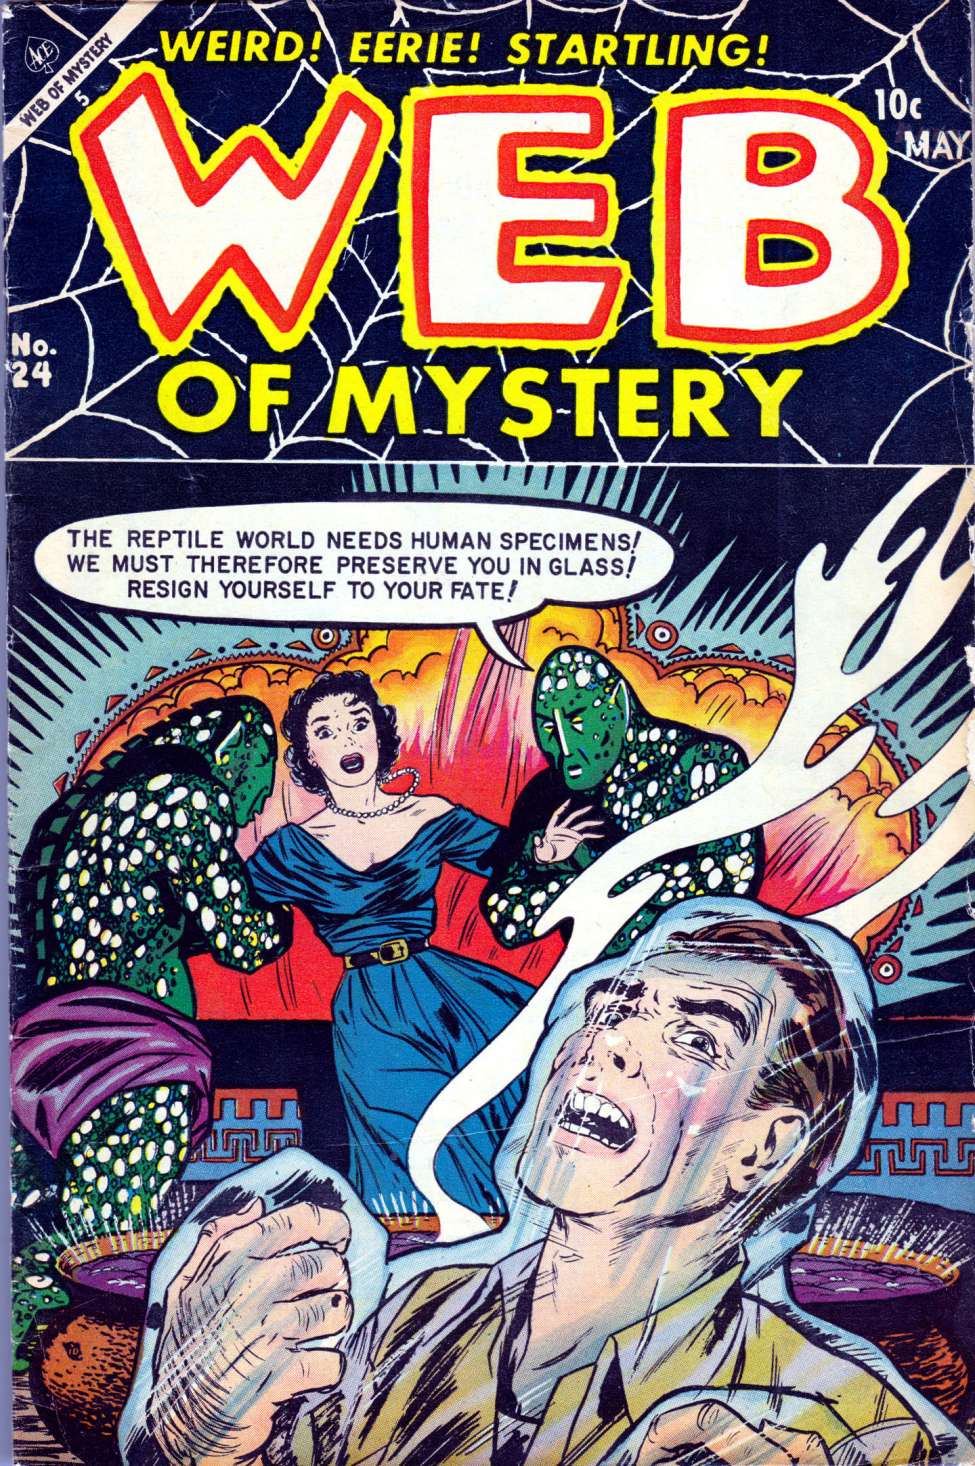 Comic Book Cover For Web Of Mystery 24 (alt) - Version 2